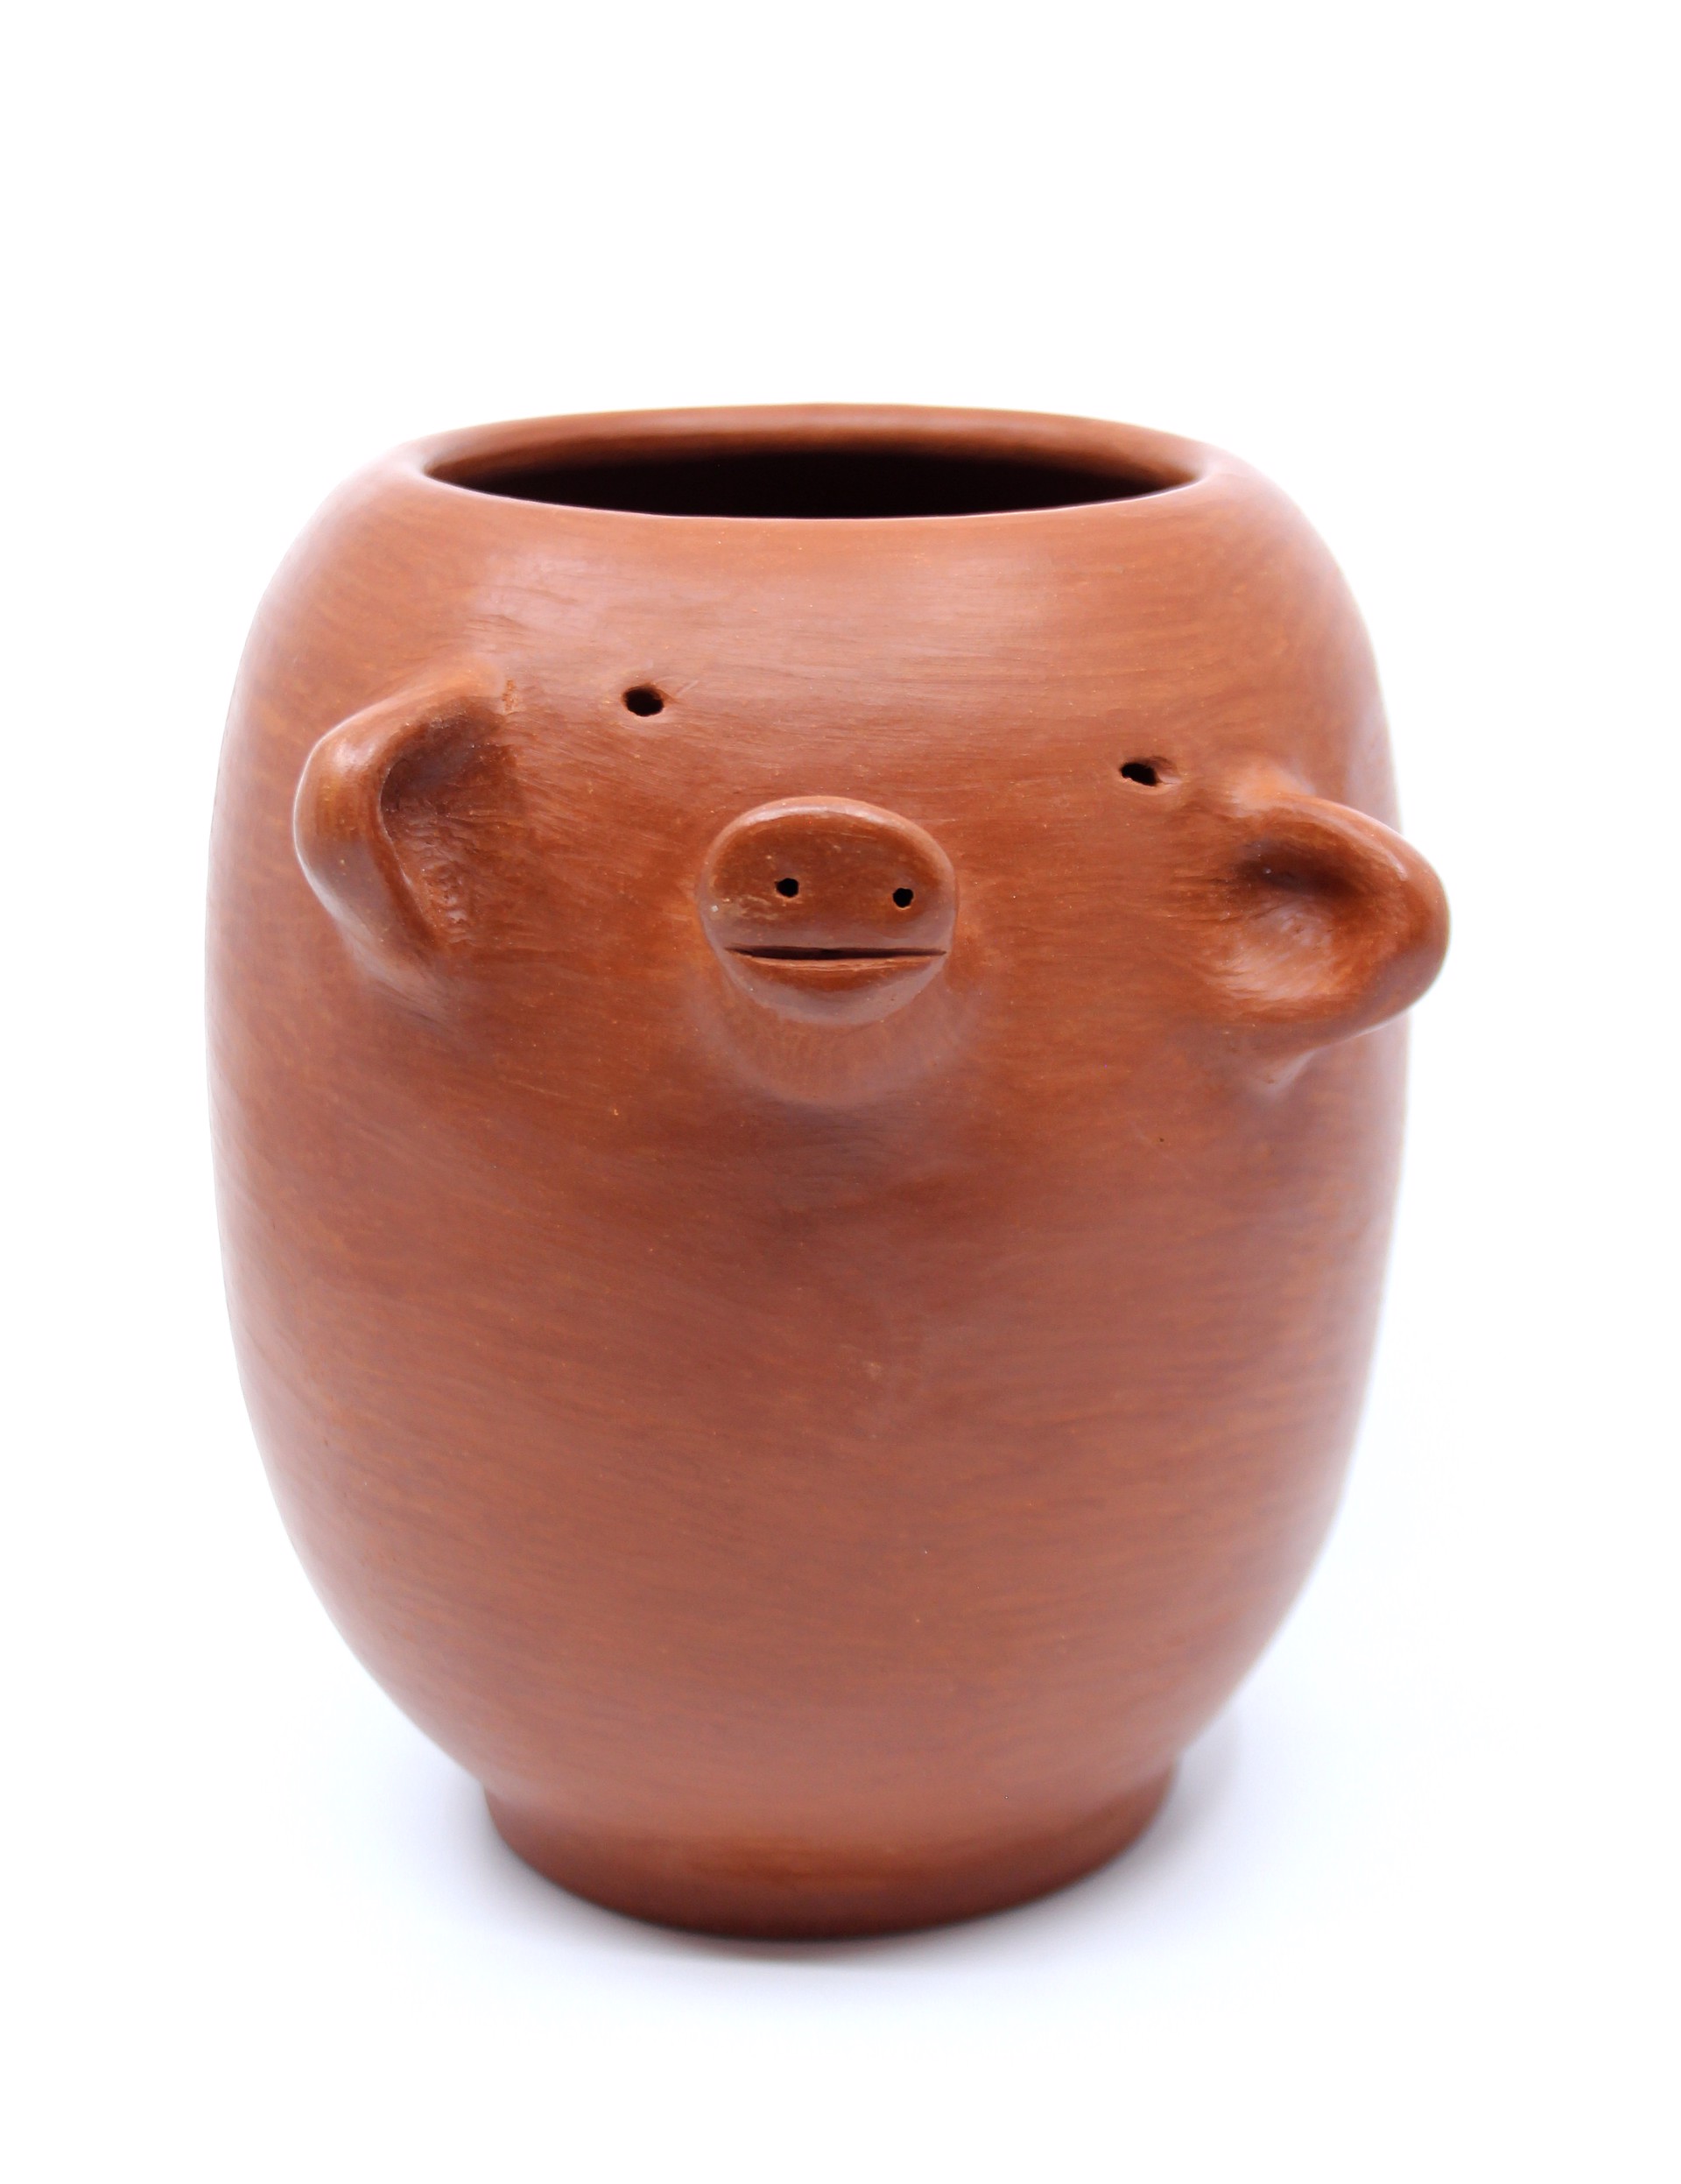 Papa Pig by Colectivo 1050°